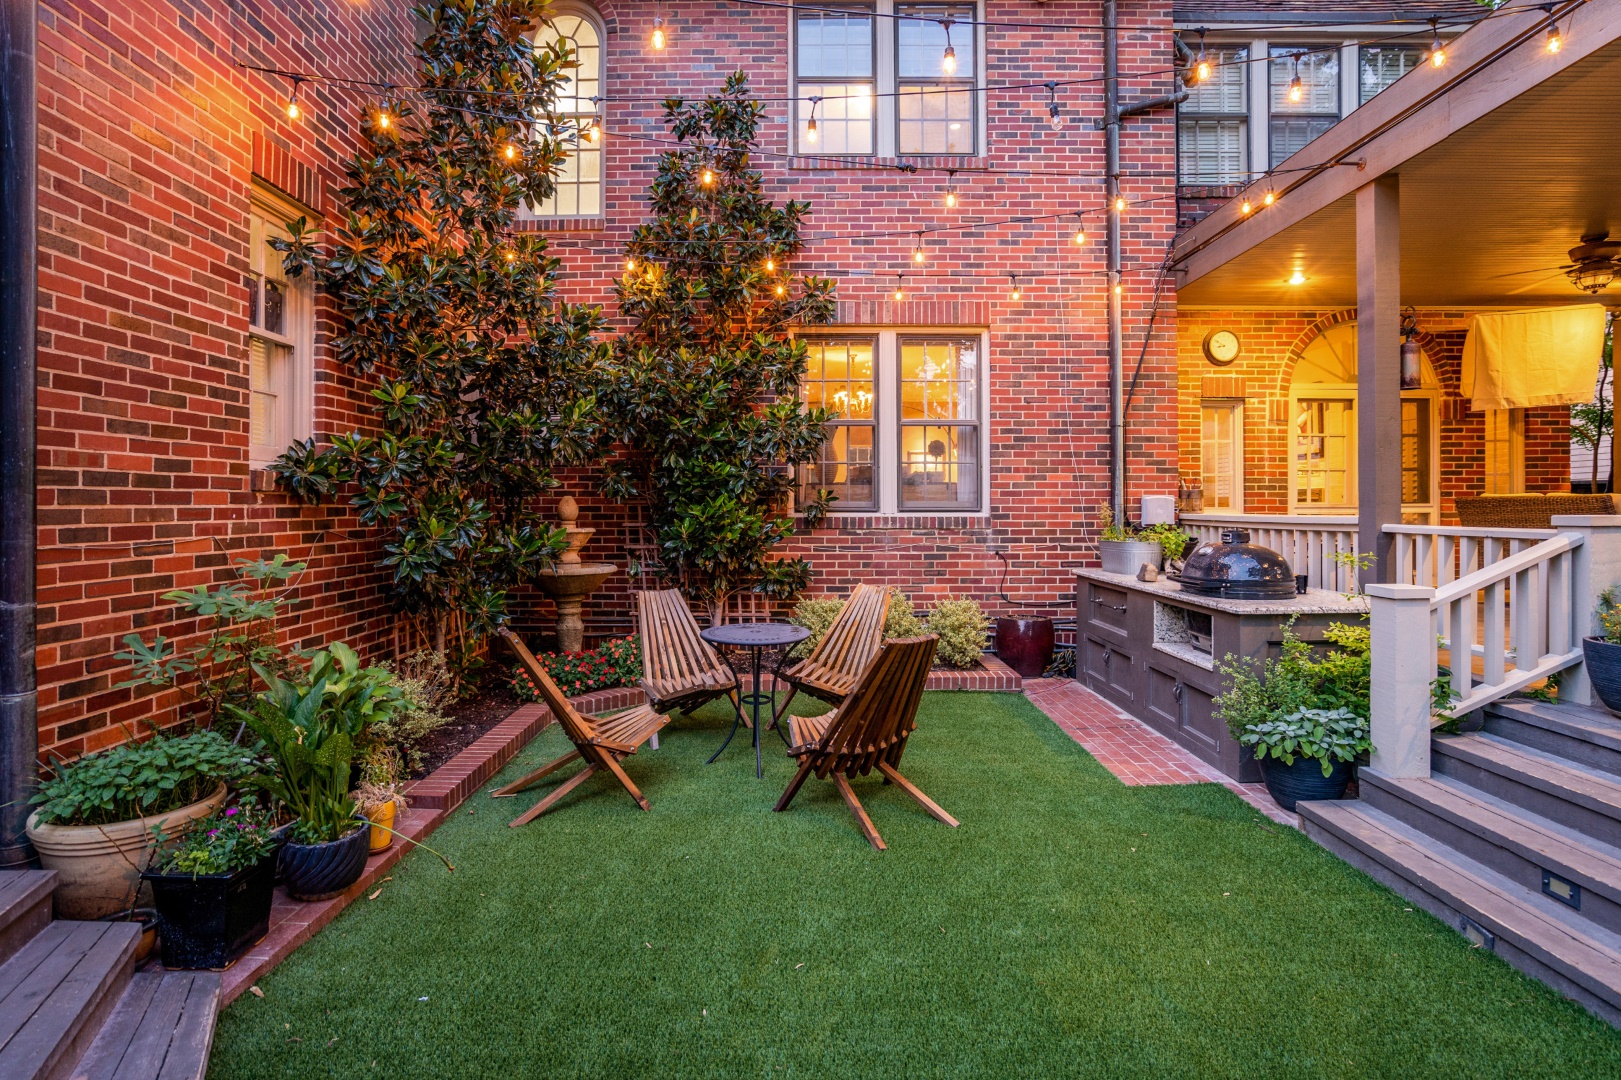 18 Transitional Landscape Designs for a Classic-Modern Look in Your Yard